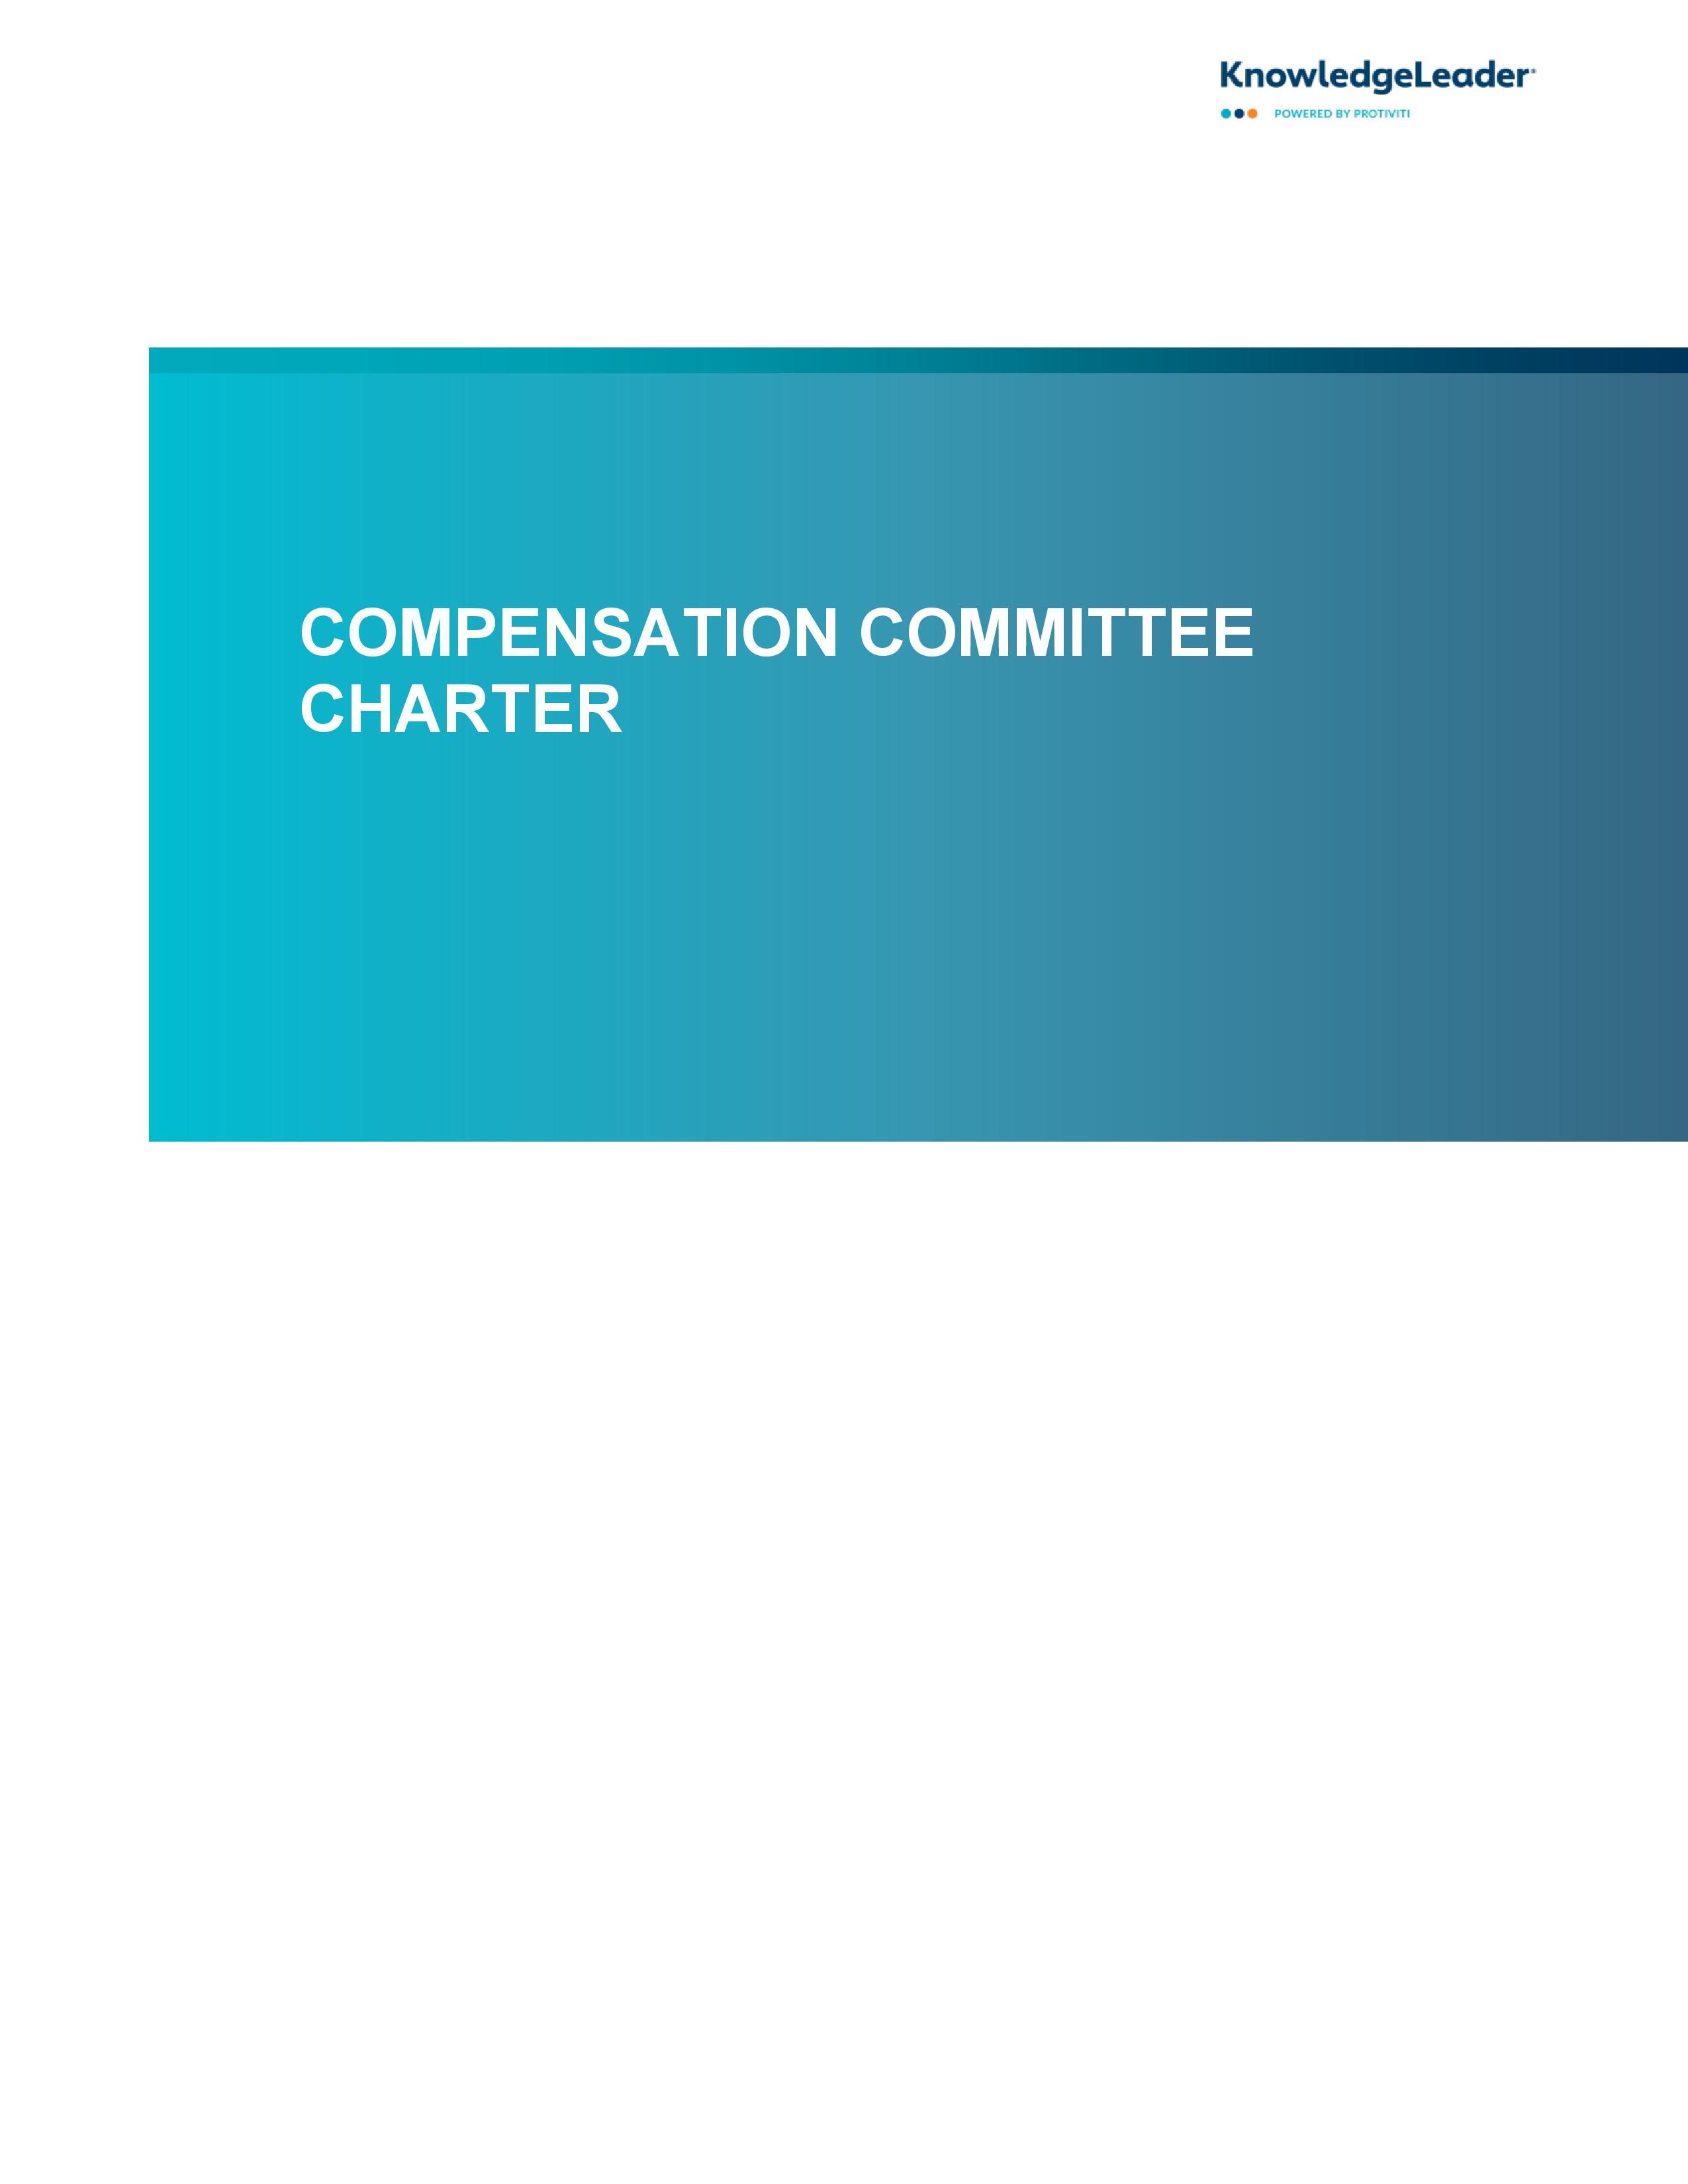 Screenshot of the first page of Compensation Committee Charter